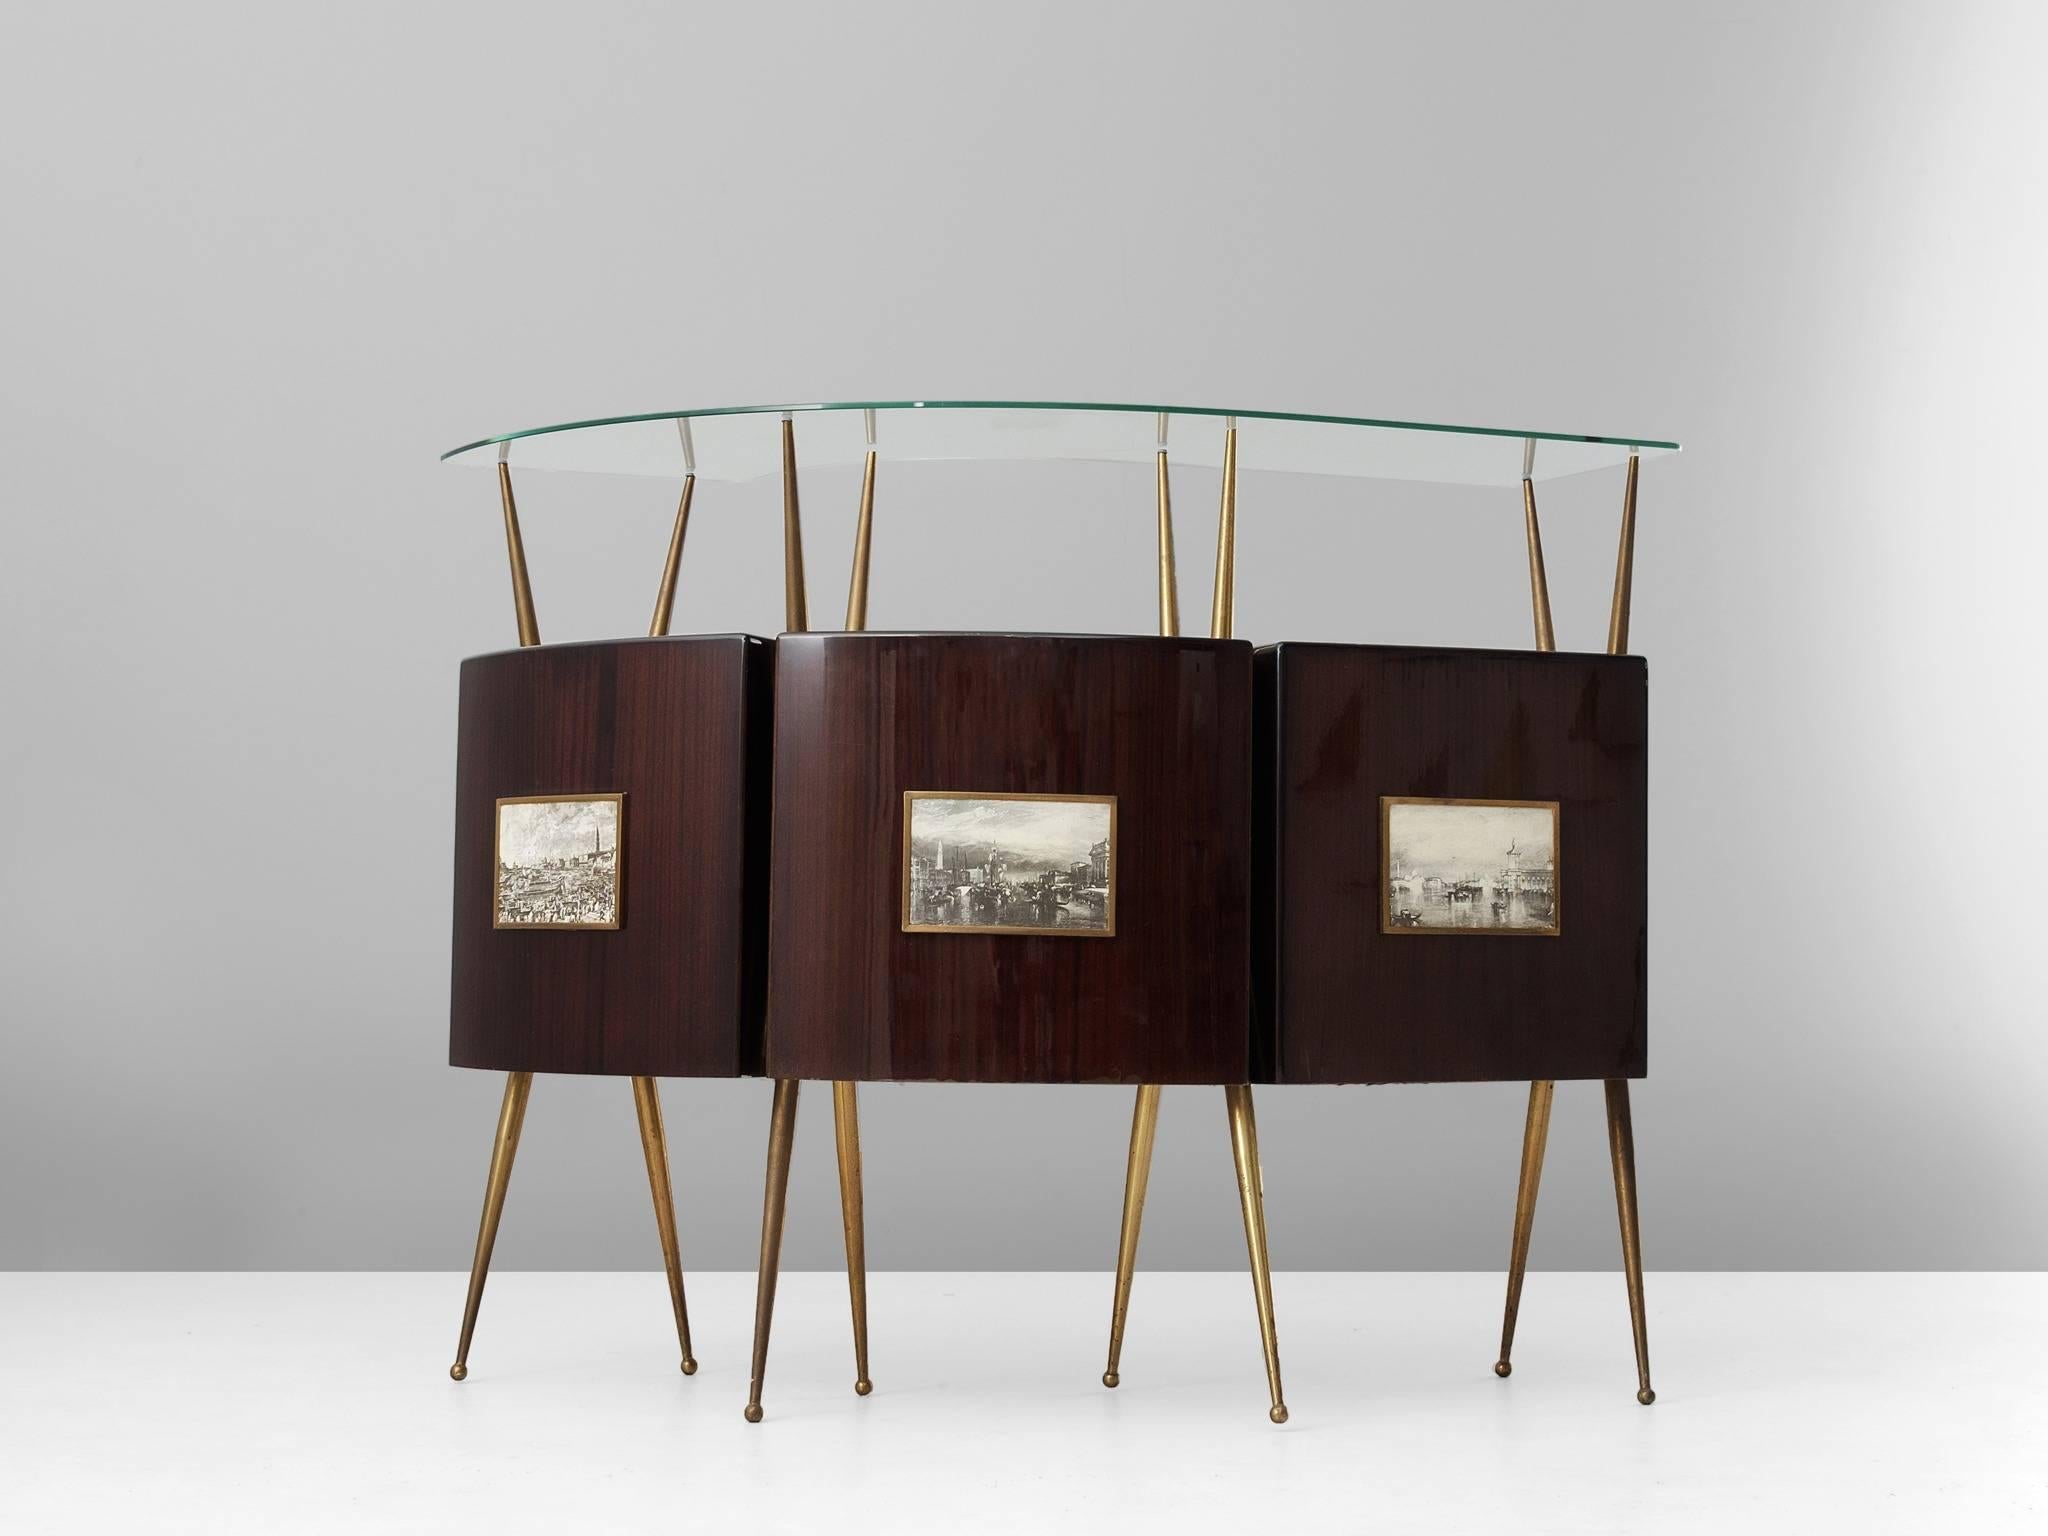 Bar, in mahogany, brass and glass, Italy, 1950s. 

Very well made Italian dry bar. This complete bar is designed somewhere midway the 1950s and each of the counters contains a nice sketched view of an Italian city. The brass legs show some real